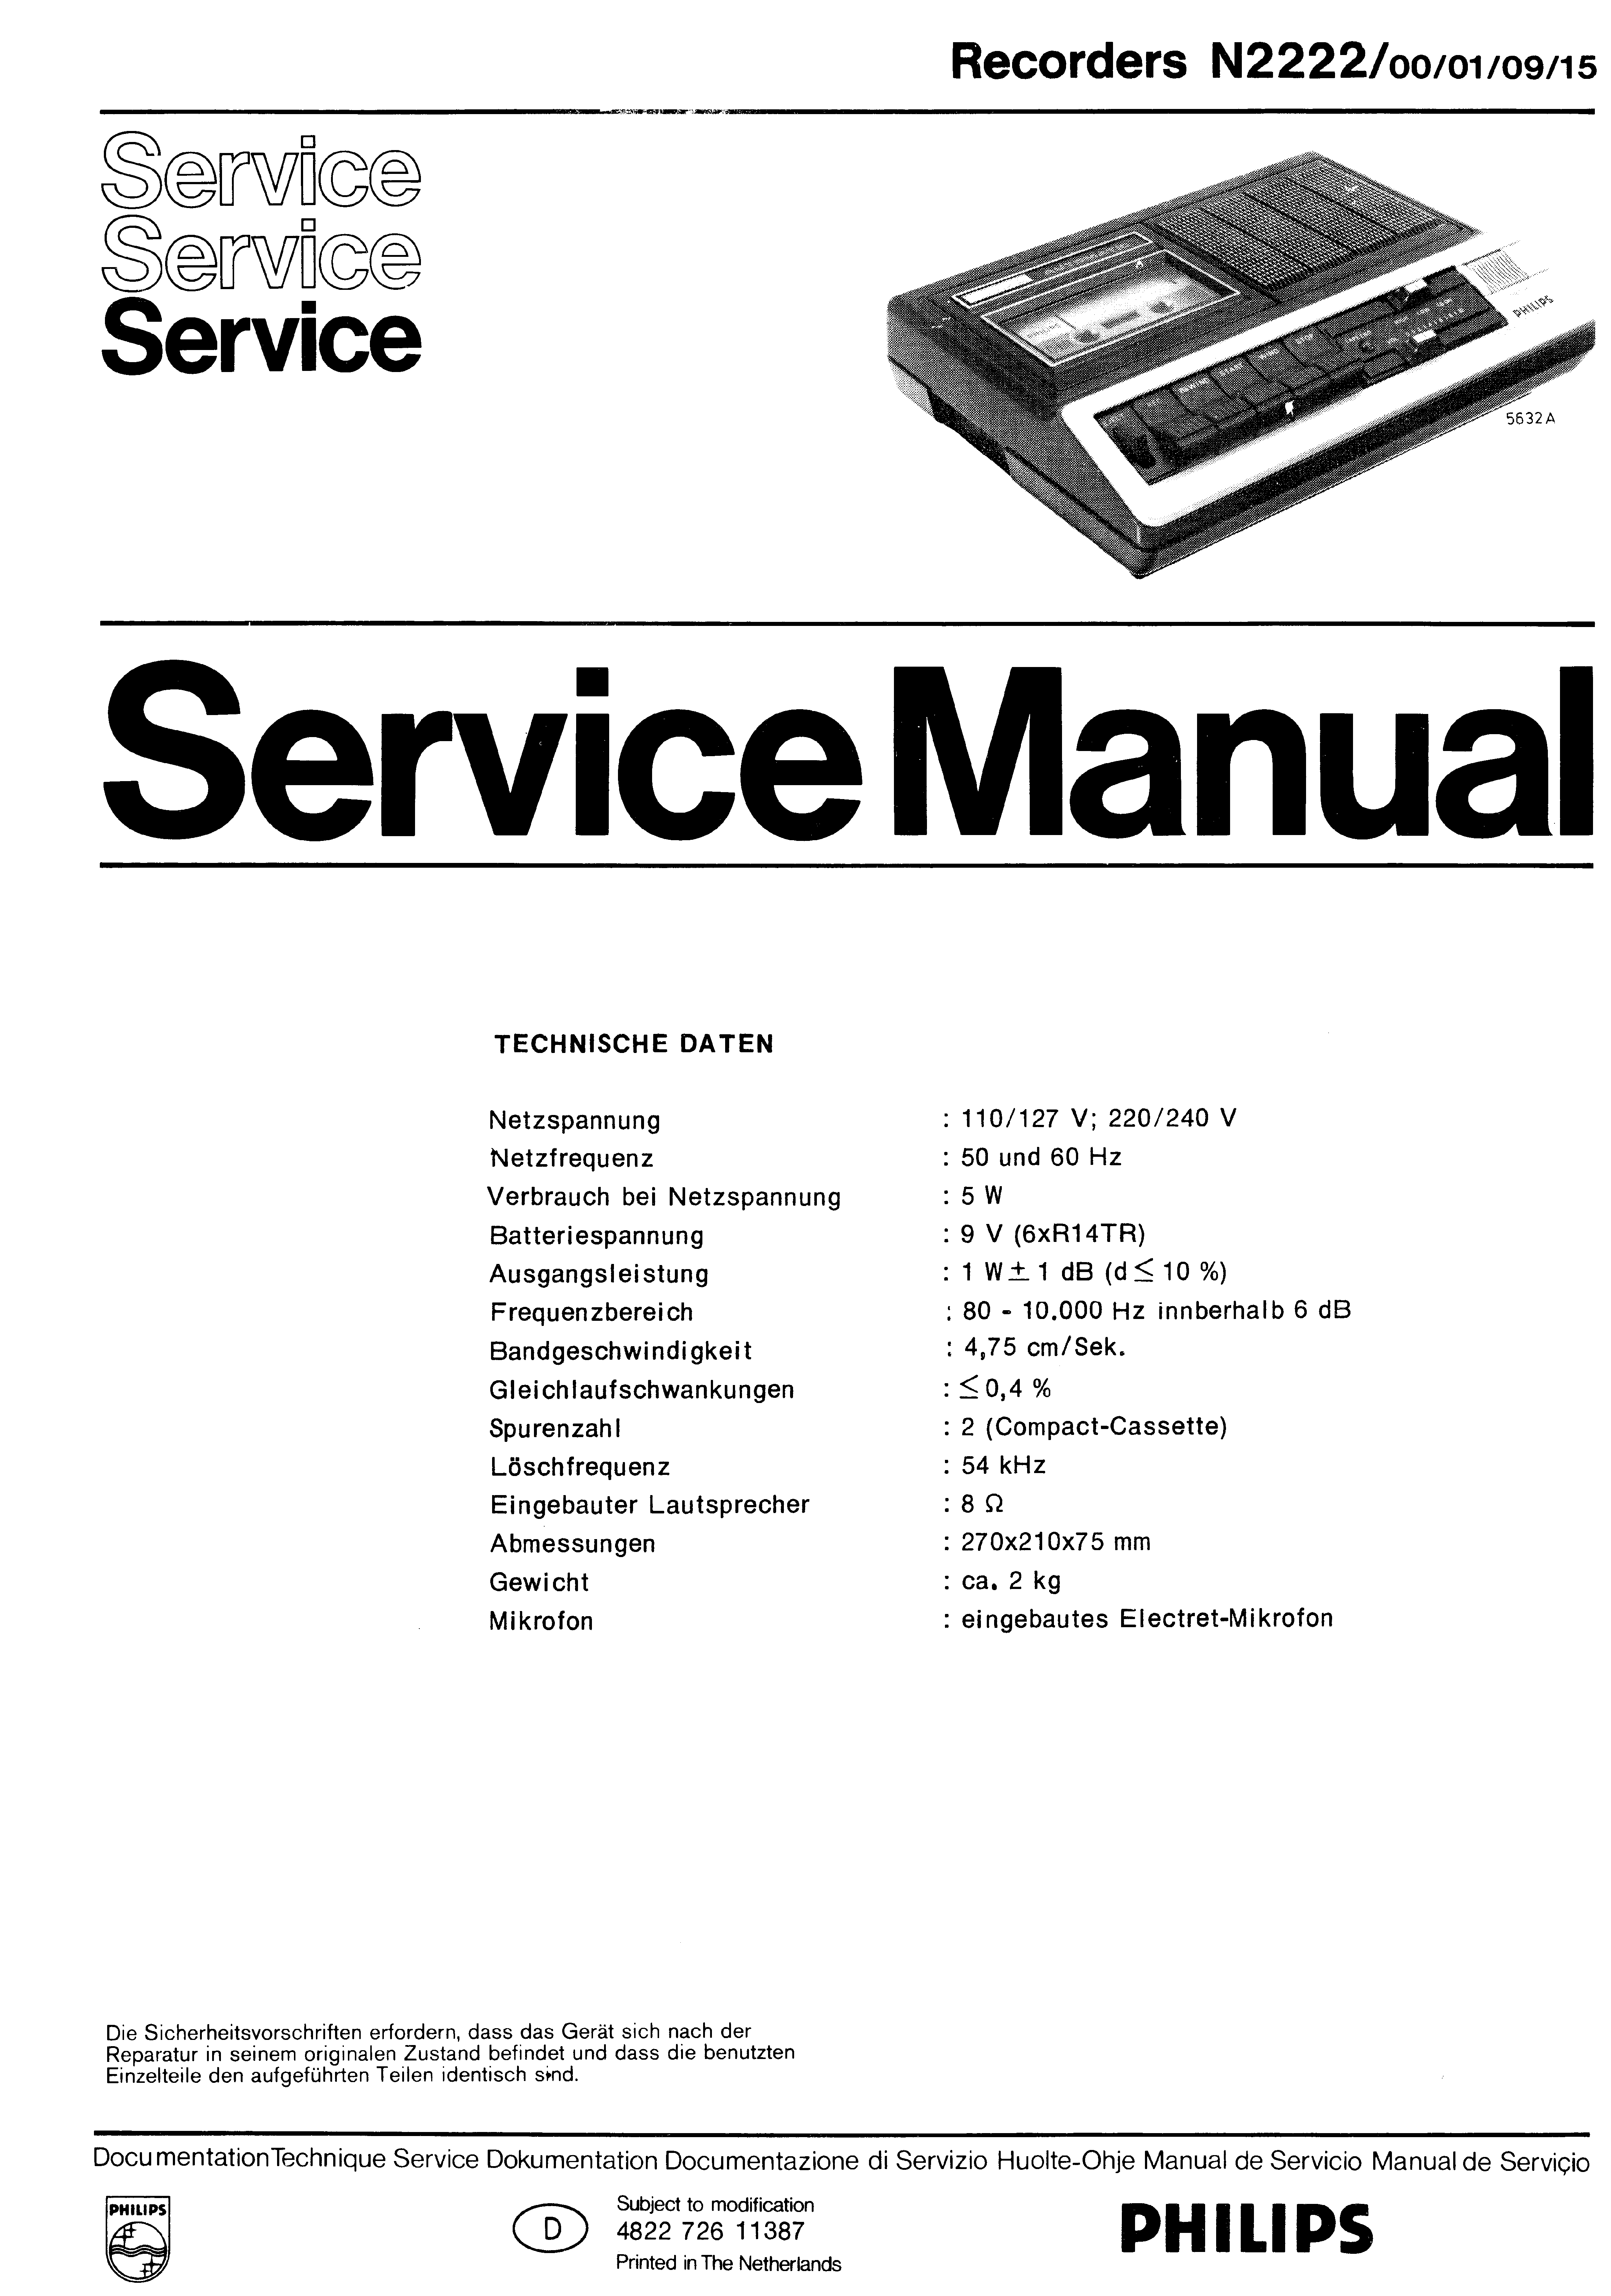 PHILIPS RECORDERS N2222 SM service manual (1st page)